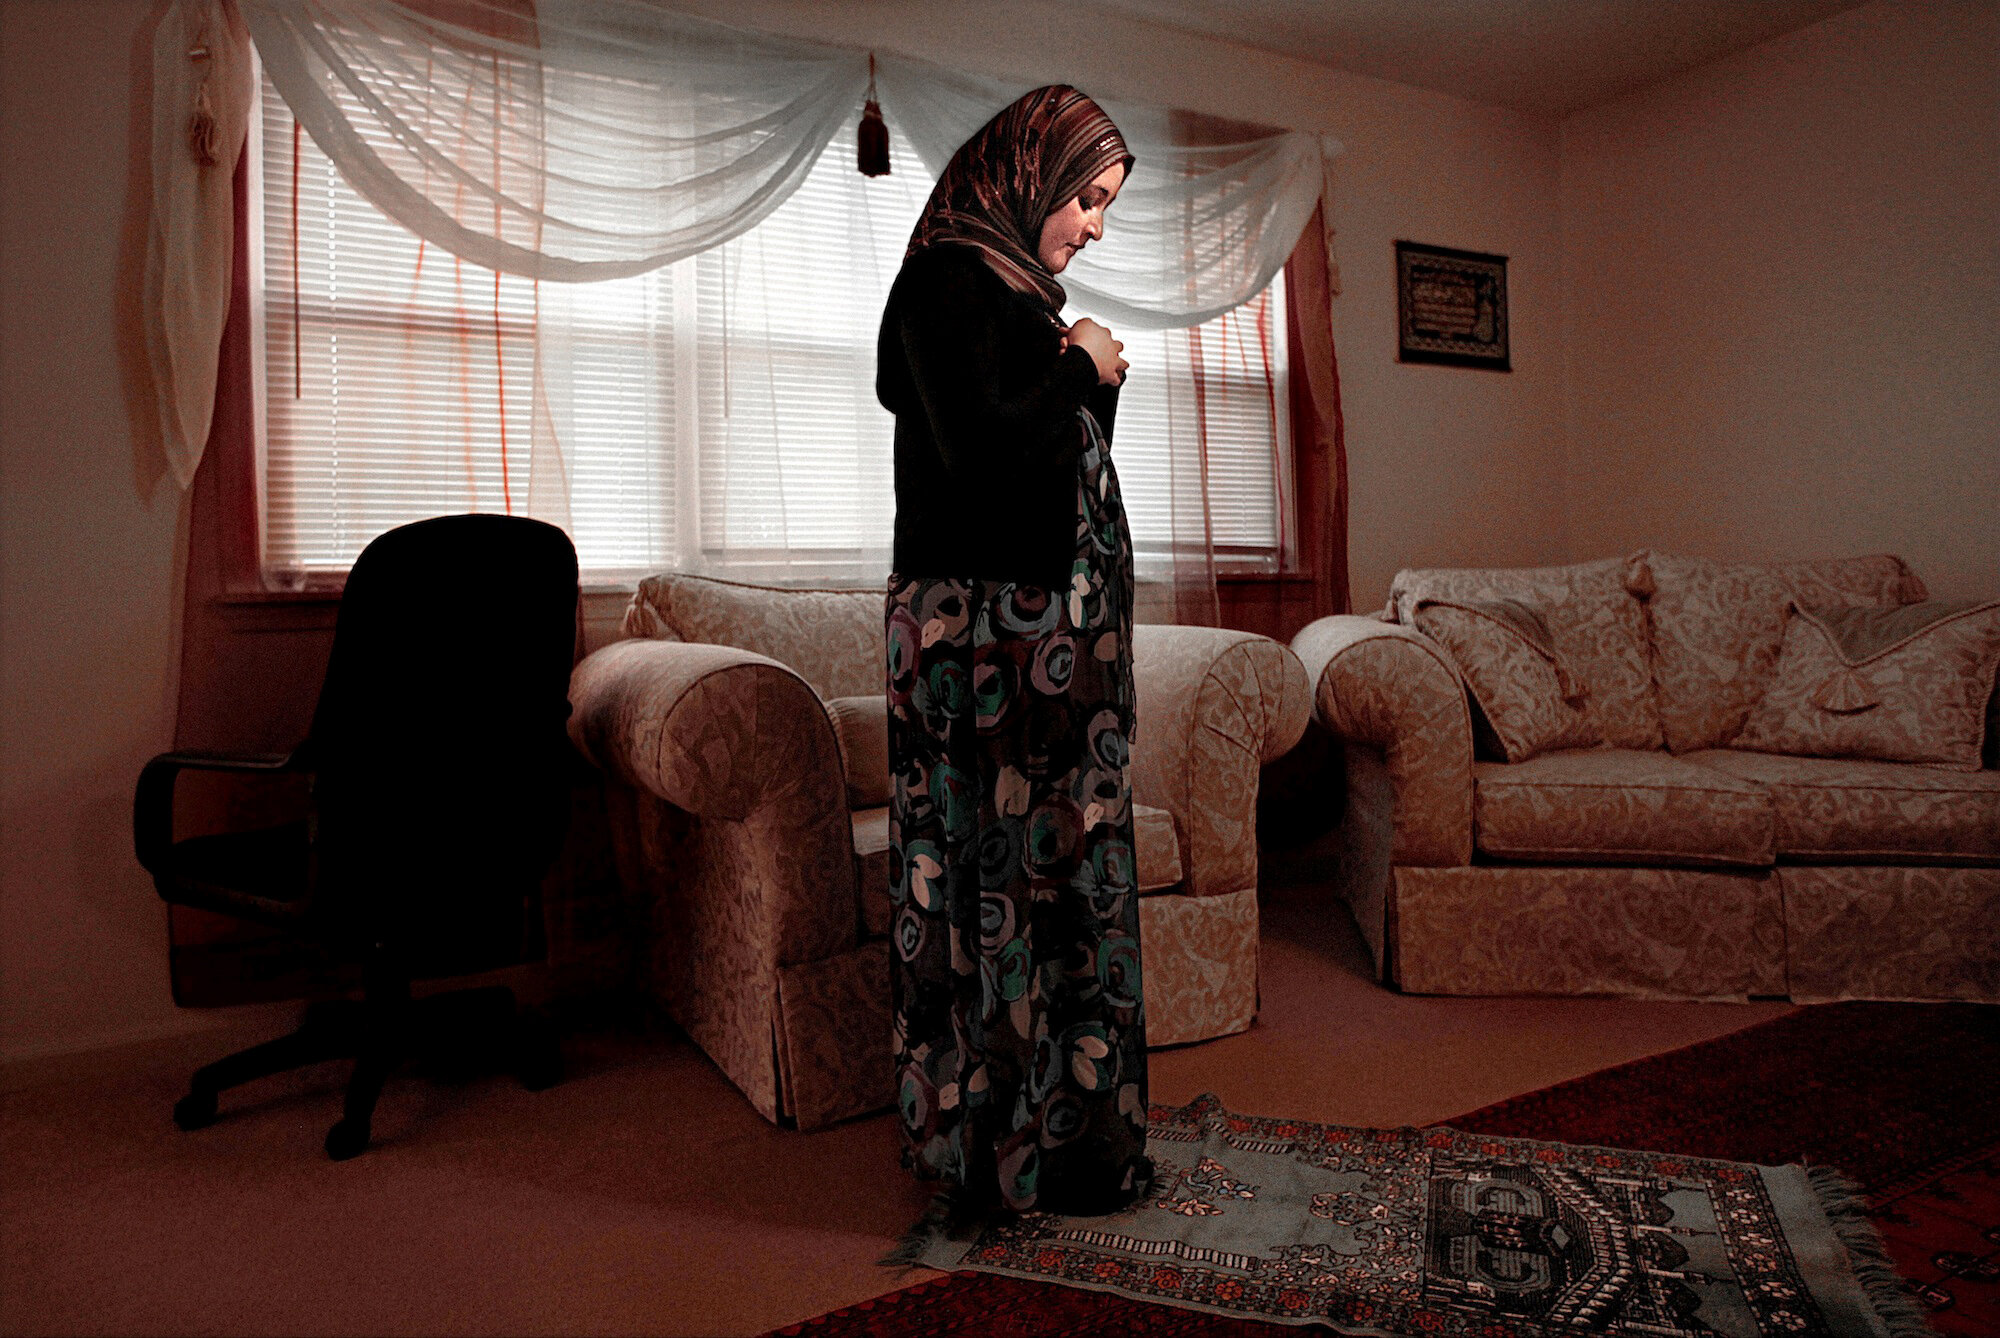   USA. St. Joseph, Missouri. 2010. Deeba Safi prays at her house. Deeba and her husband, Ahmad, have been working with other Muslim families to establish the first Mosque in St. Joseph but have faced a lot of resistance from the local non-Muslims. [U